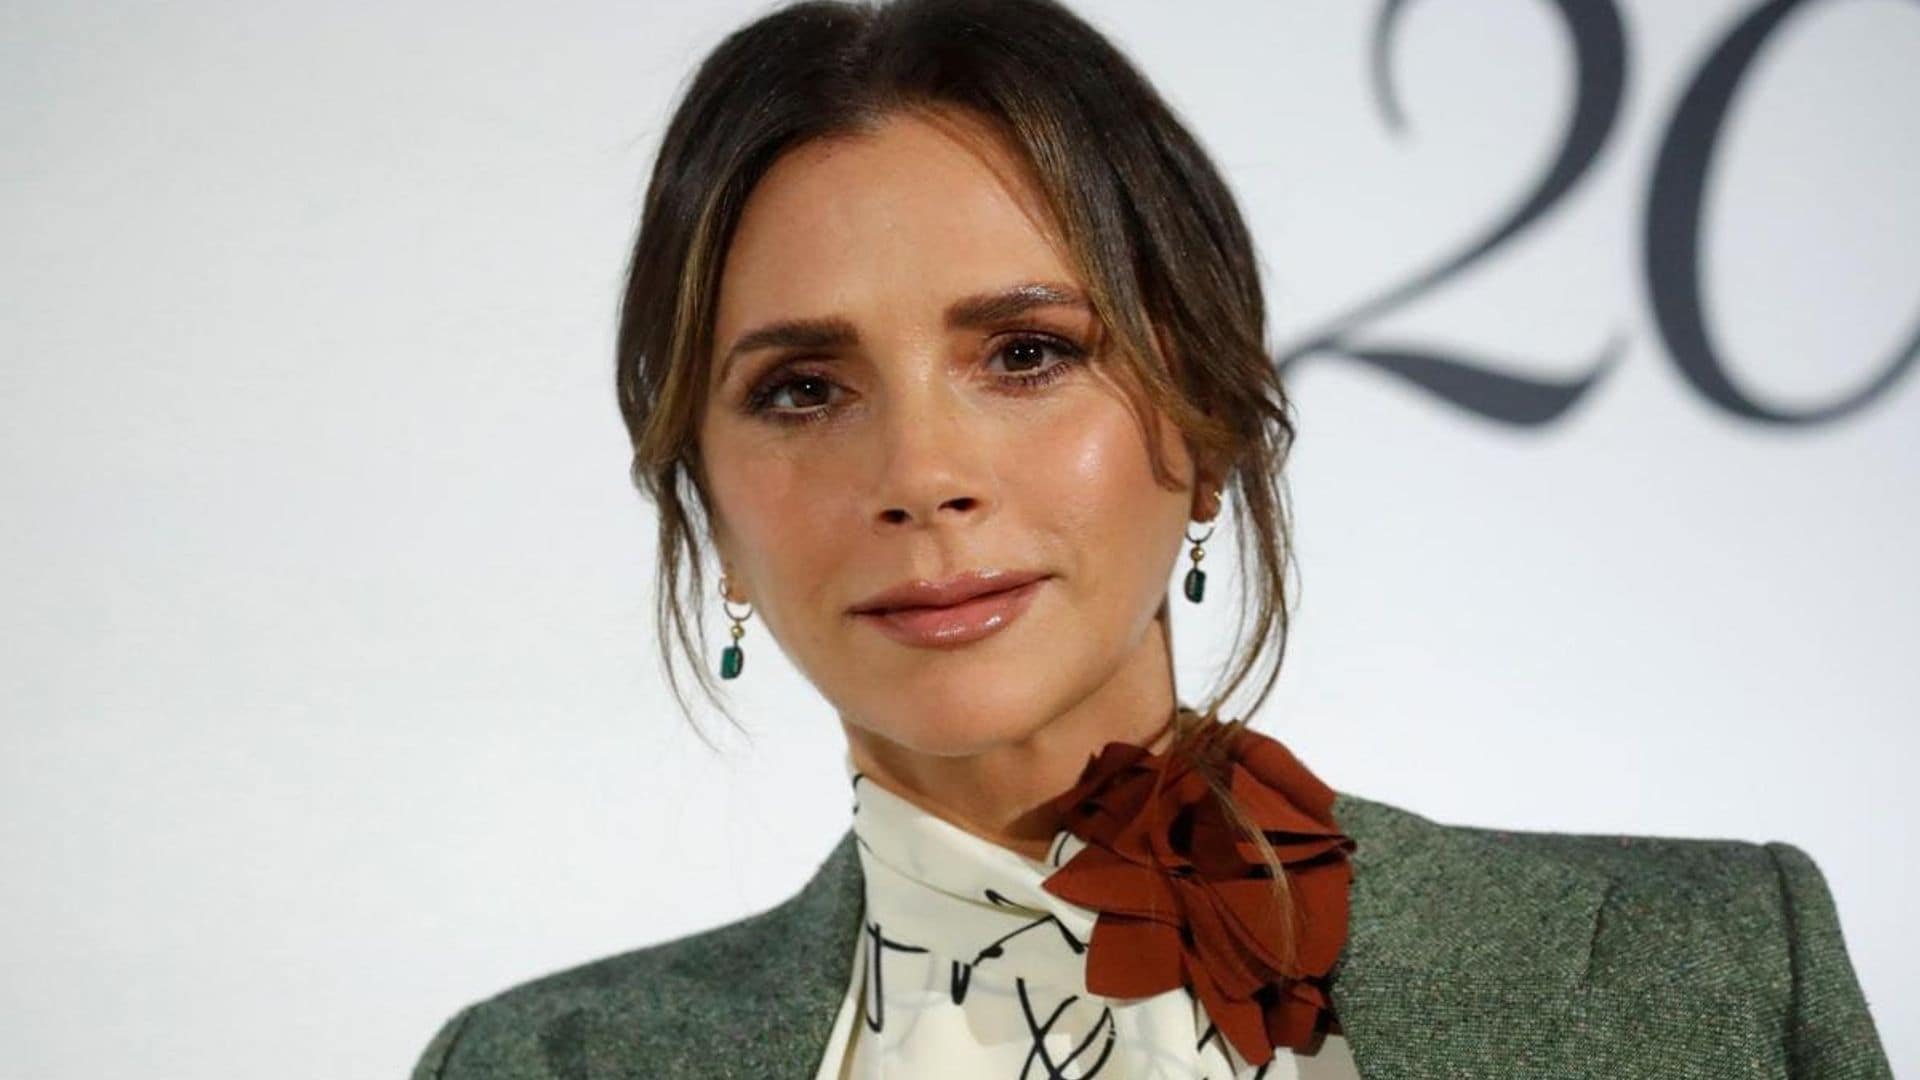 Victoria Beckham poses with lookalike sister Louise Adams in birthday celebration